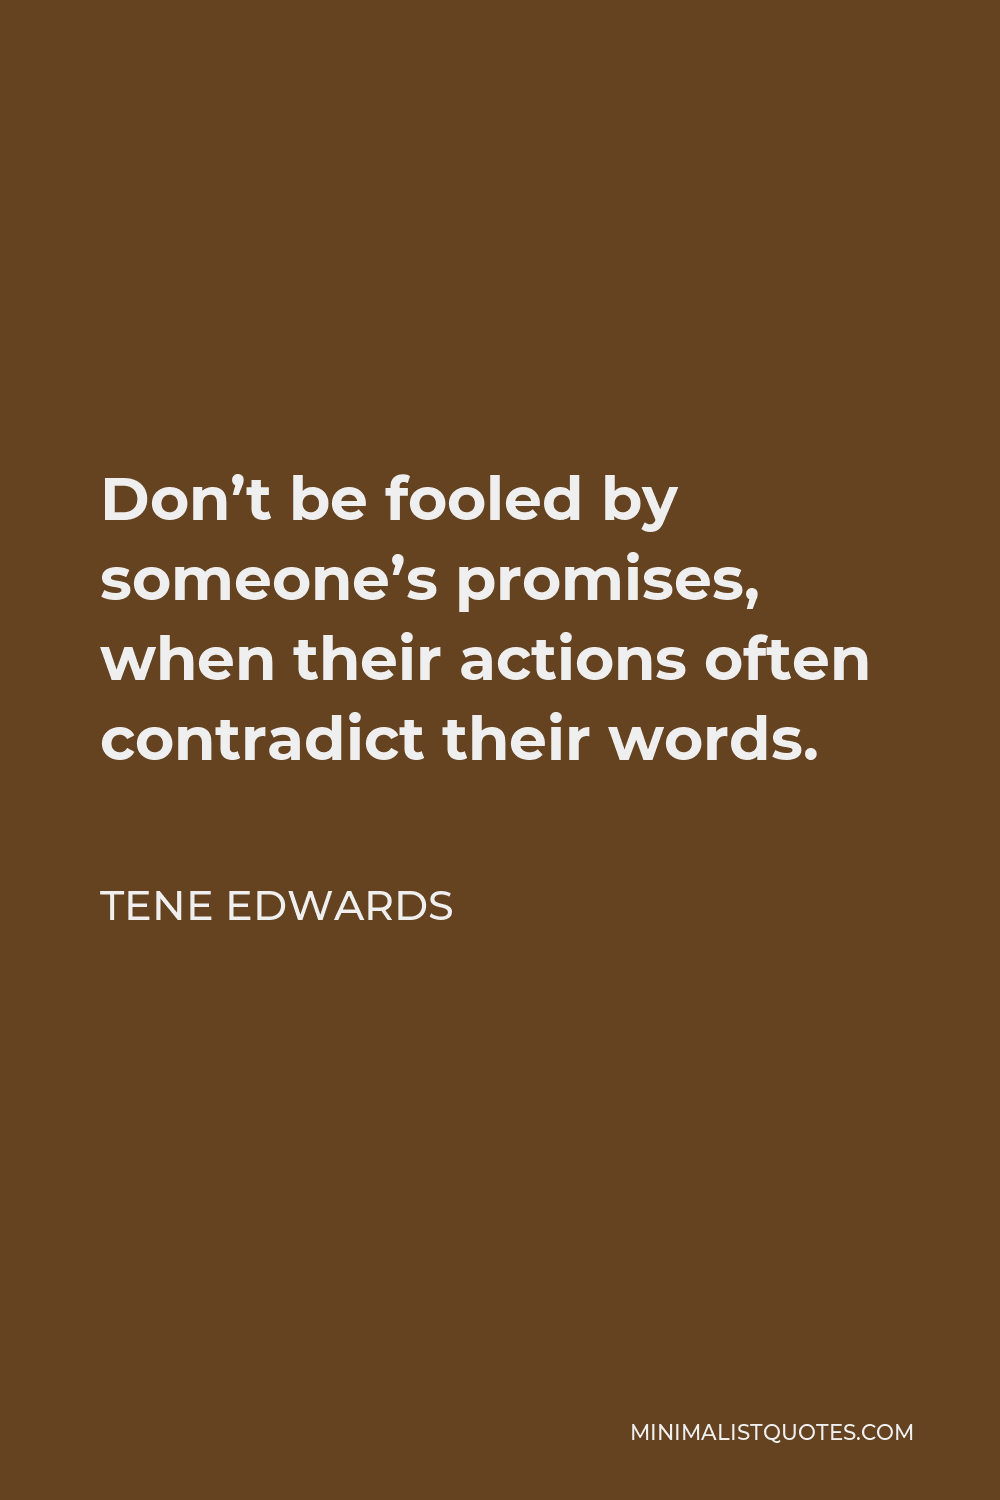 Tene Edwards Quote - Don’t be fooled by someone’s promises, when their actions often contradict their words.